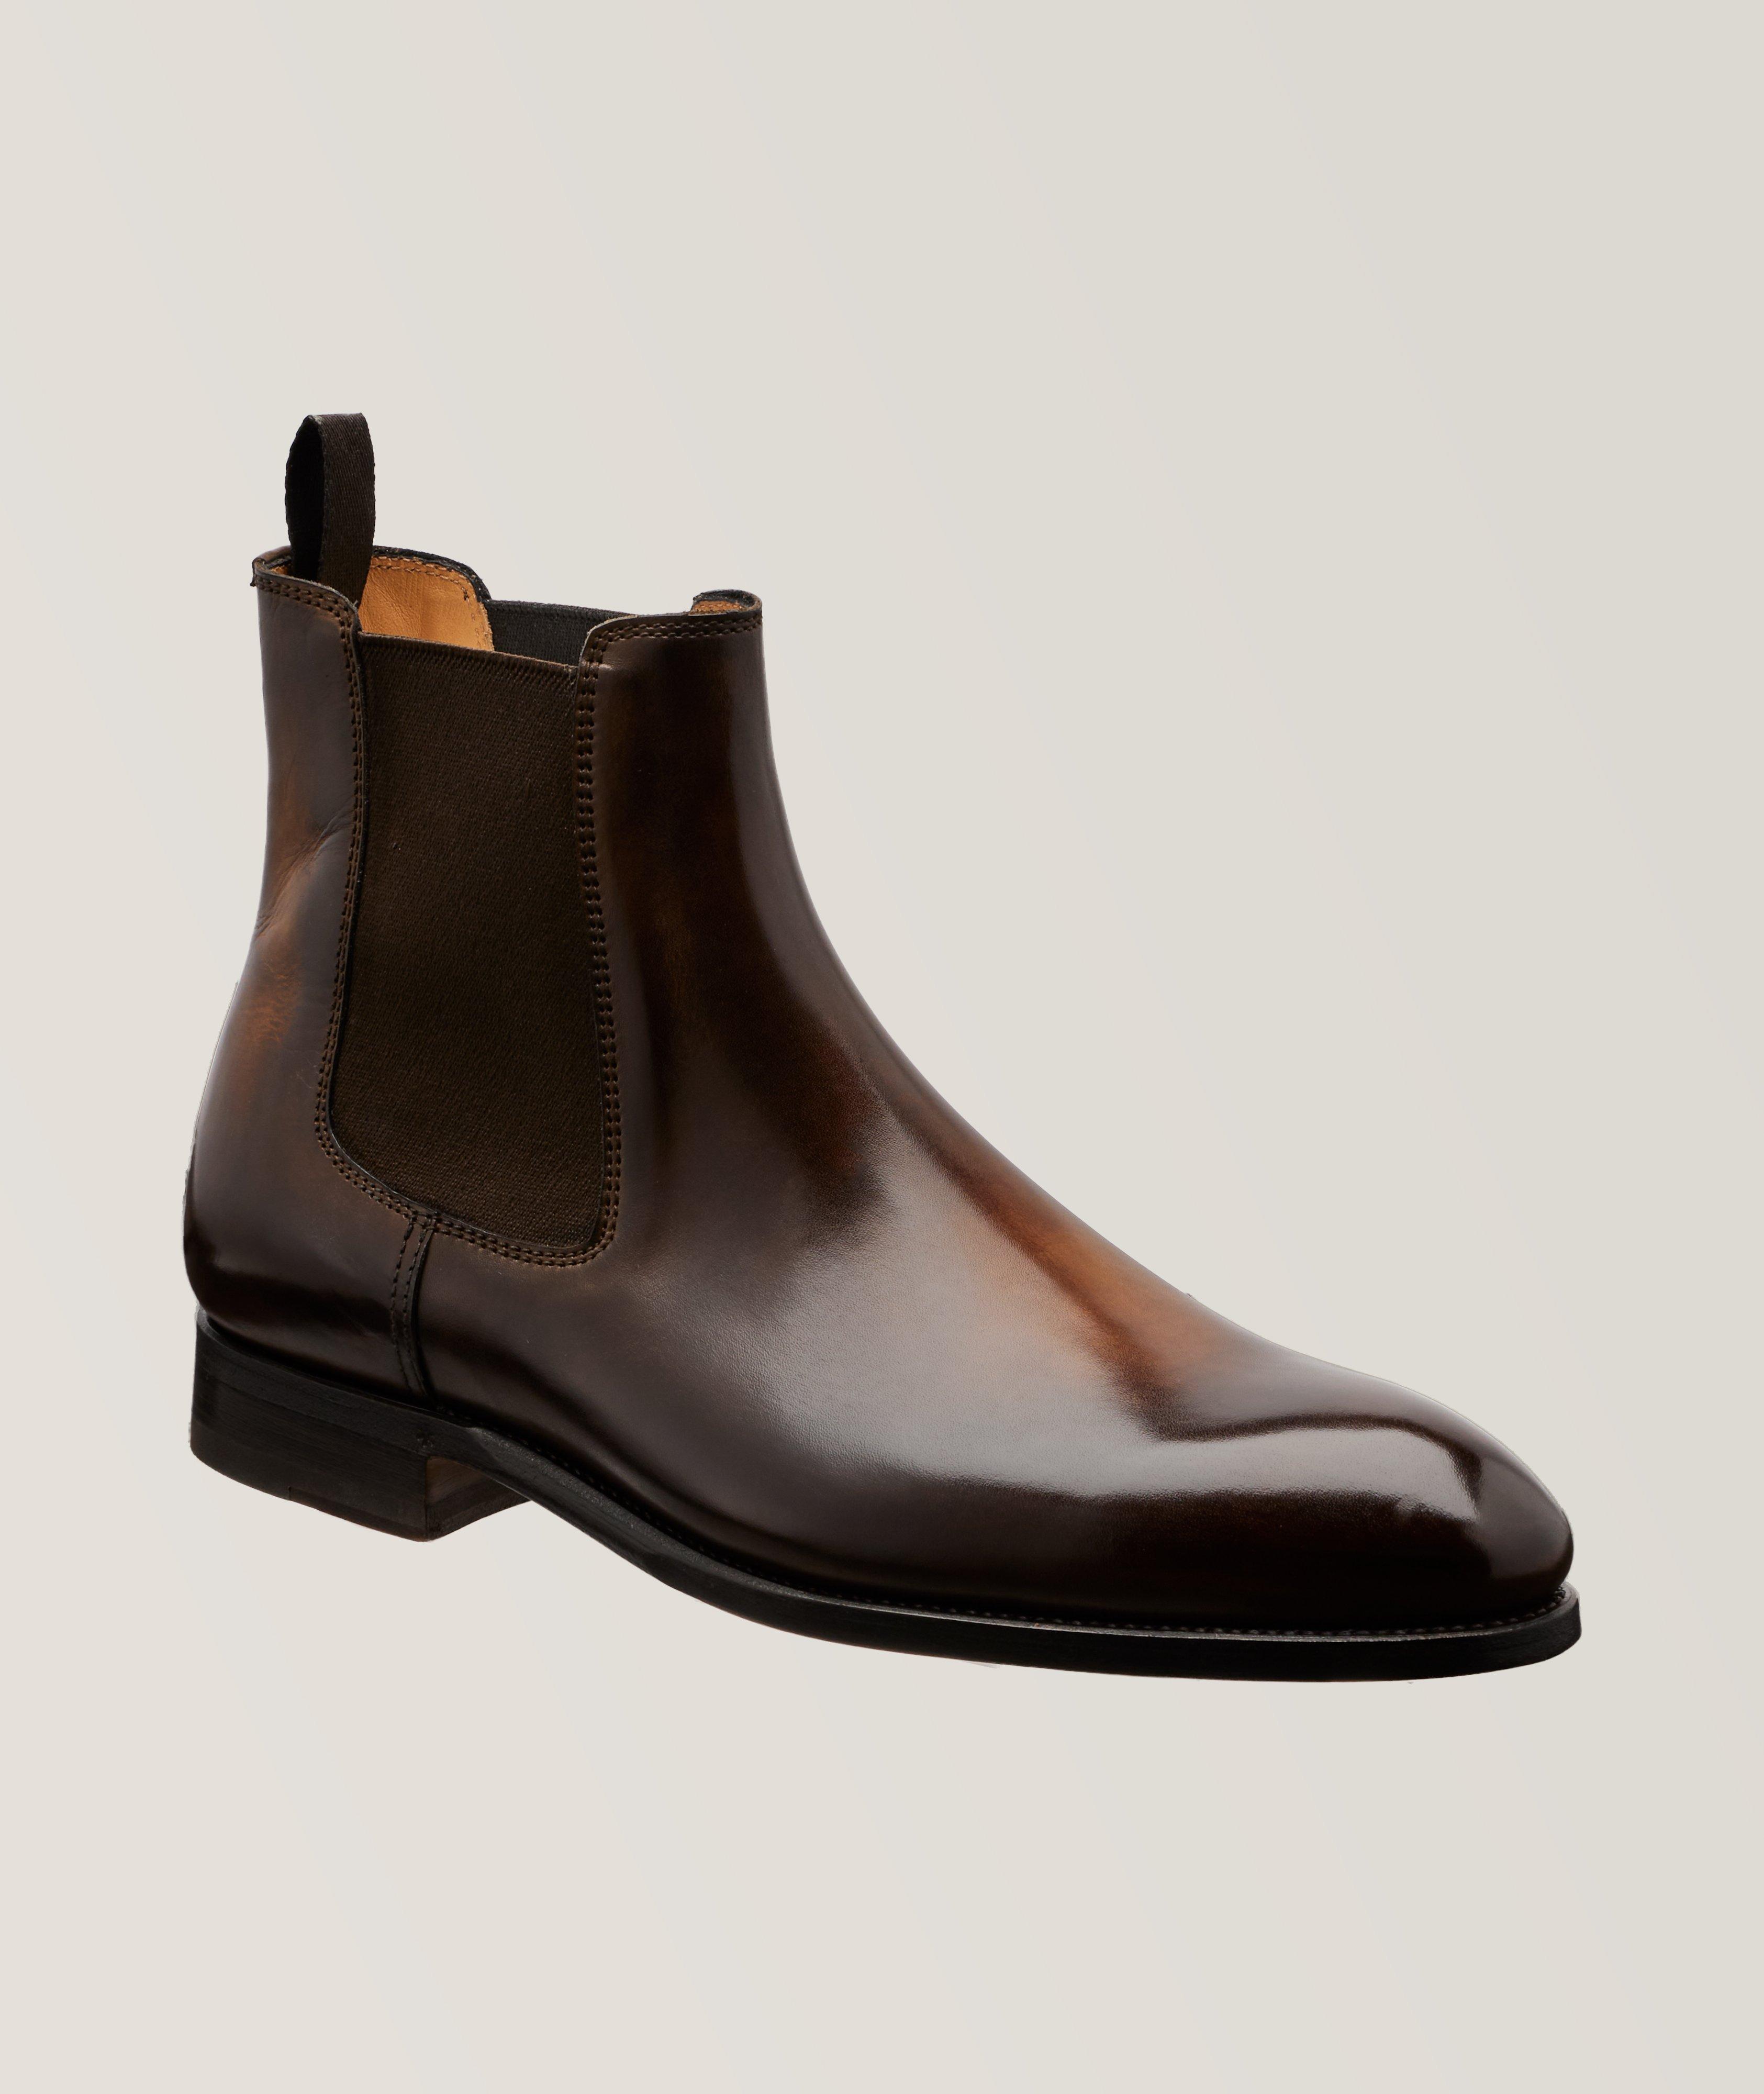 Cavaliere Burnished Leather Chelsea Boots image 0